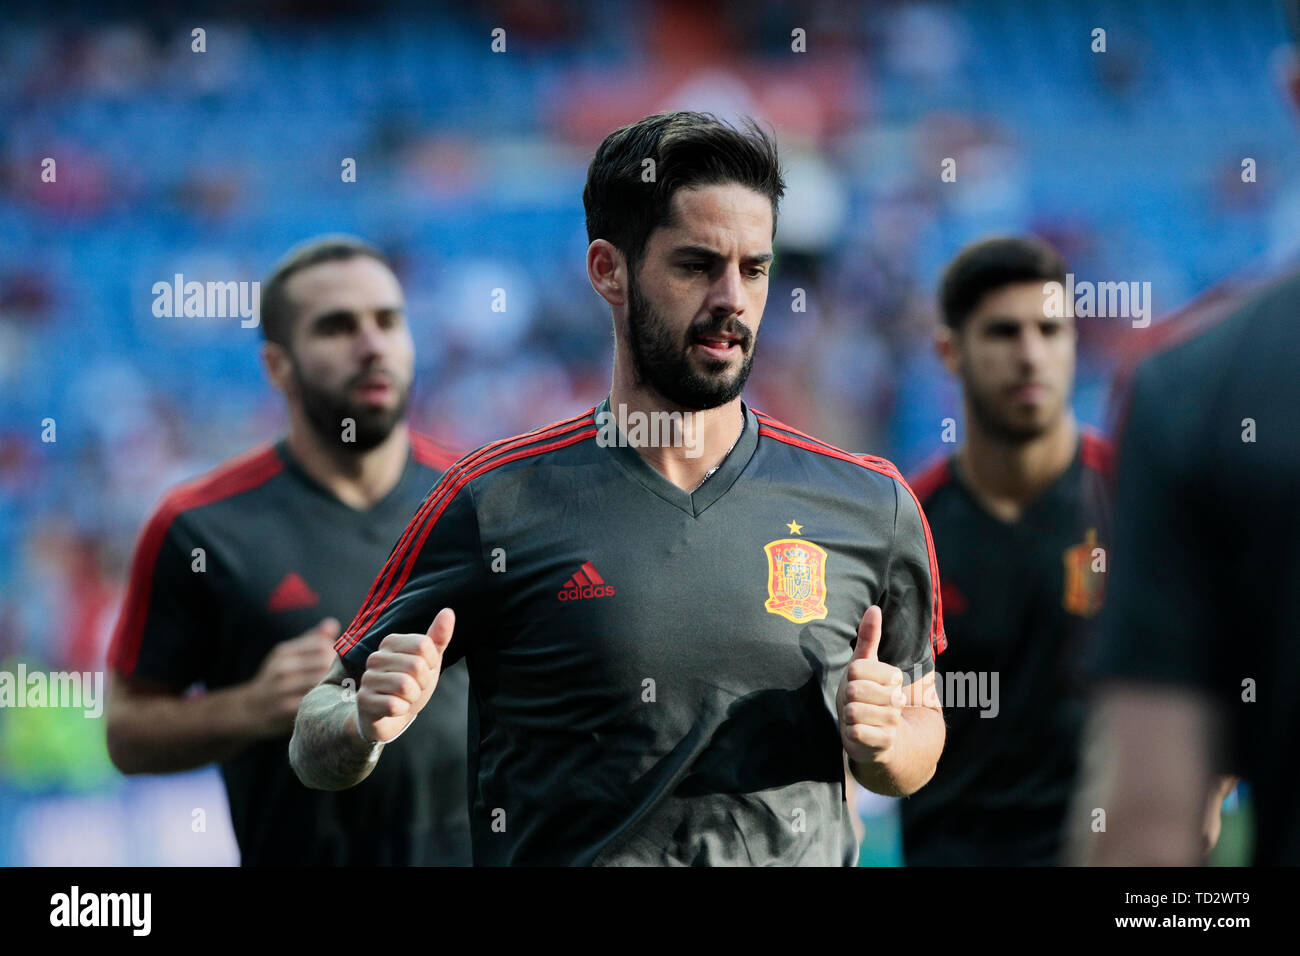 Spain national team player Isco during UEFA EURO 2020 Qualifier match between Spain and Sweden at Santiago Bernabeu Stadium in Madrid. Final score: Spain 3 - Sweden 0 Stock Photo